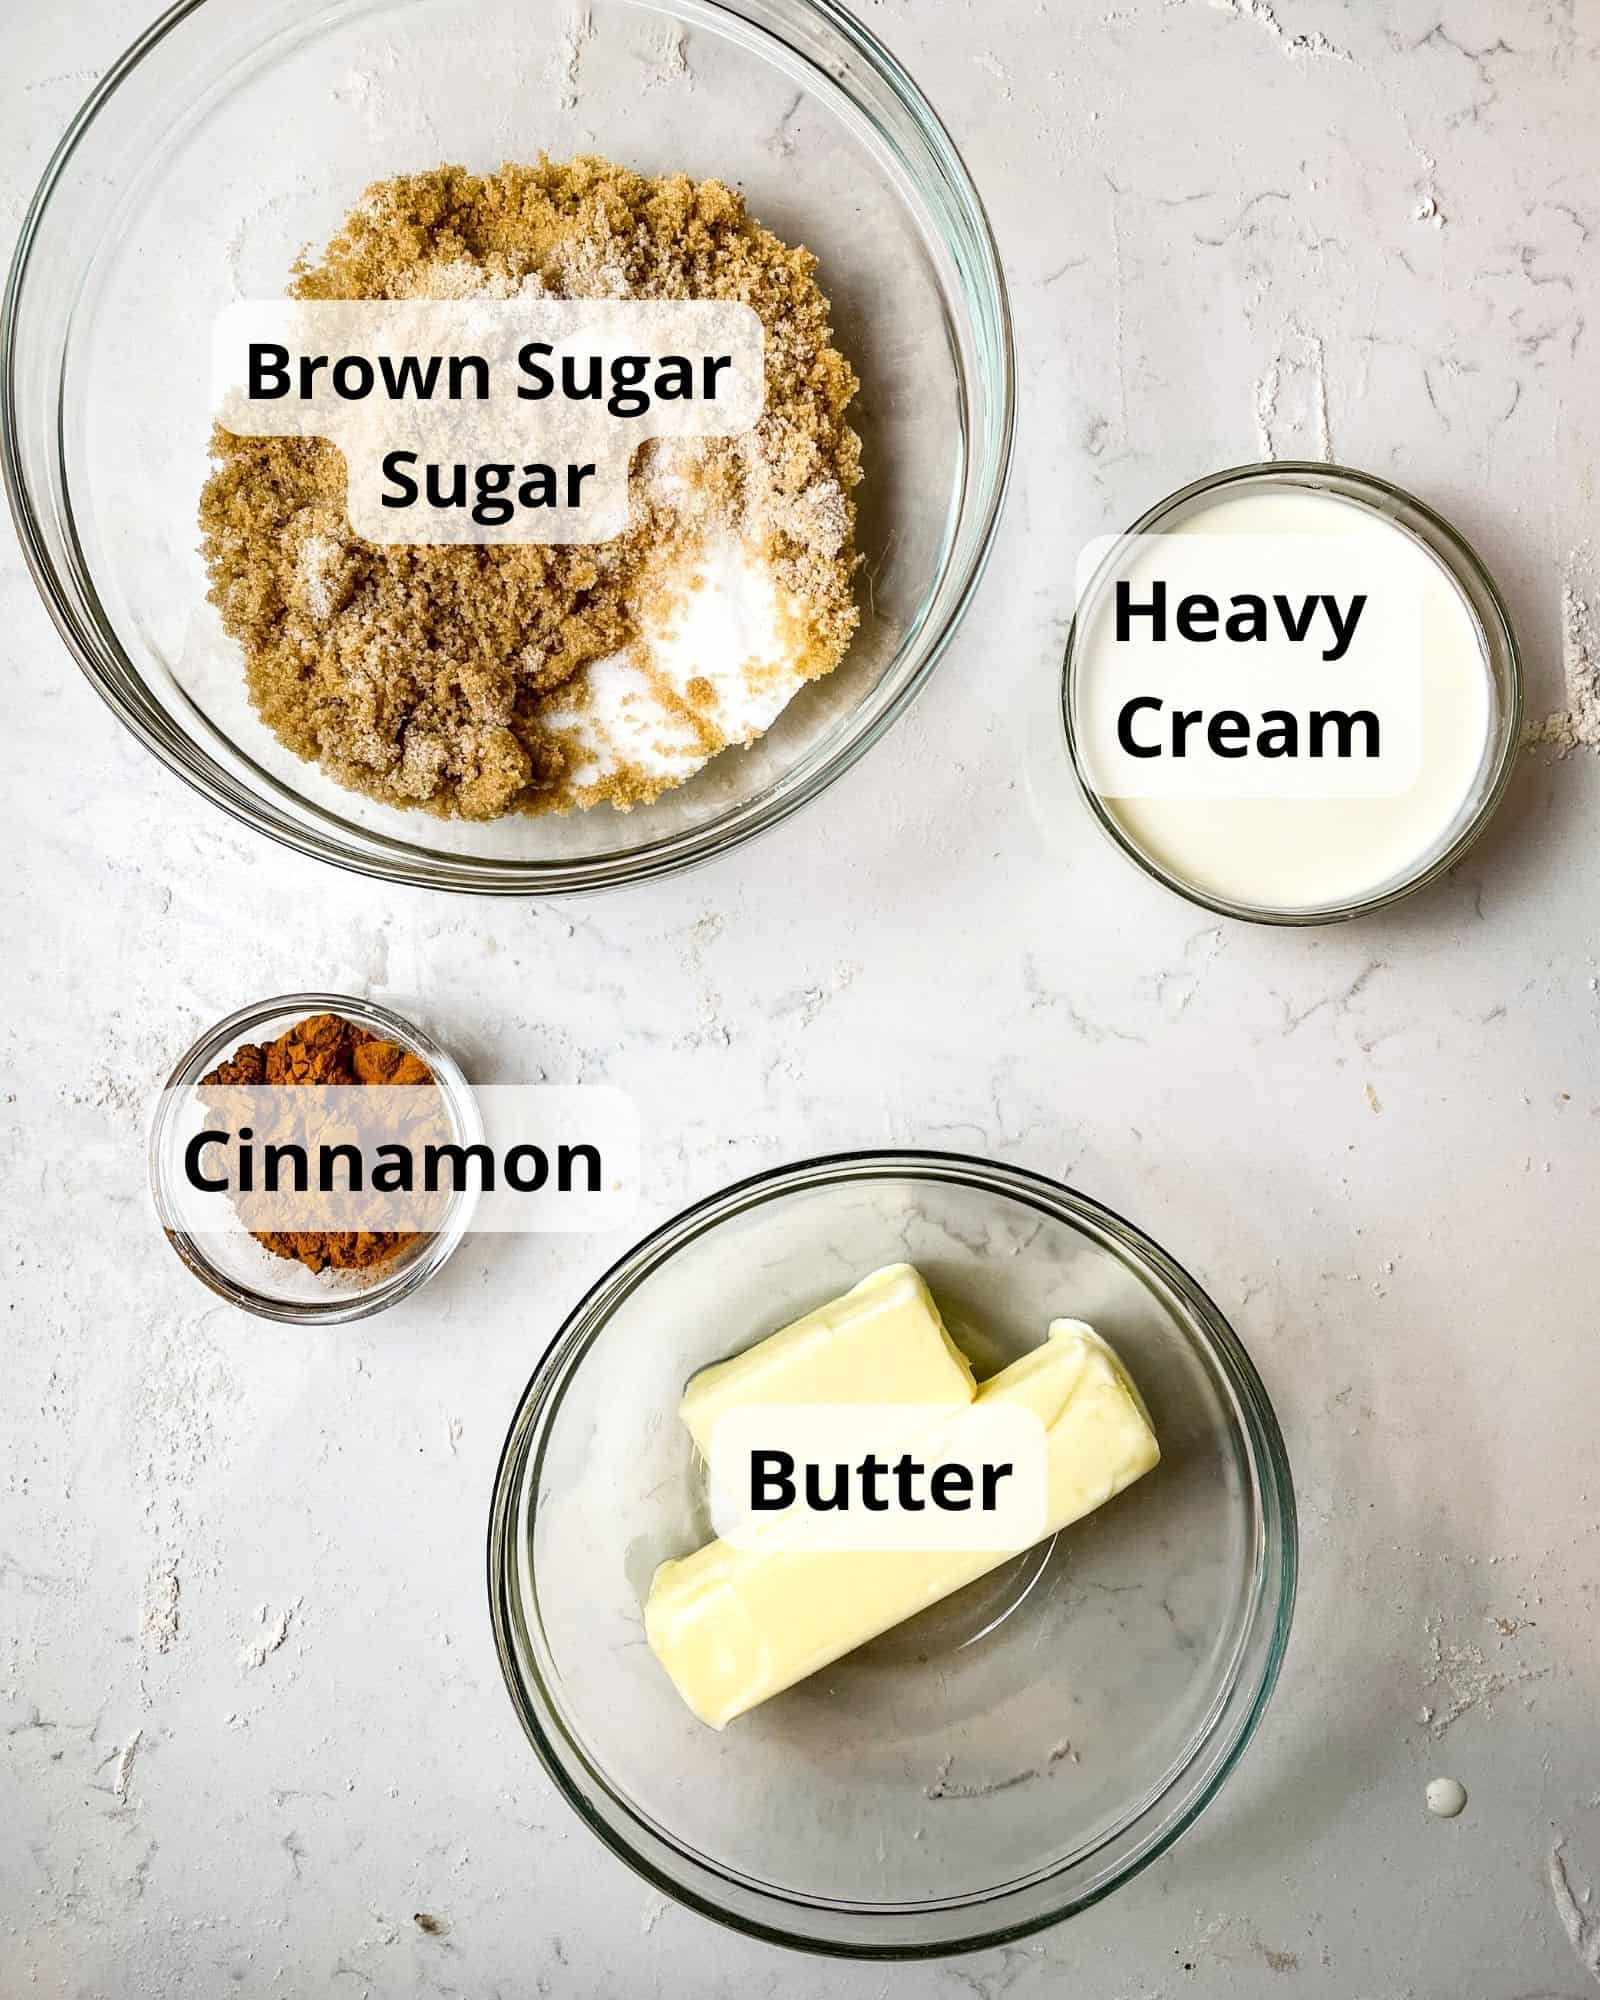 ingredients for the cinnamon roll filling- brown sugar, sugar, cinnamon, butter, and heavy cream.